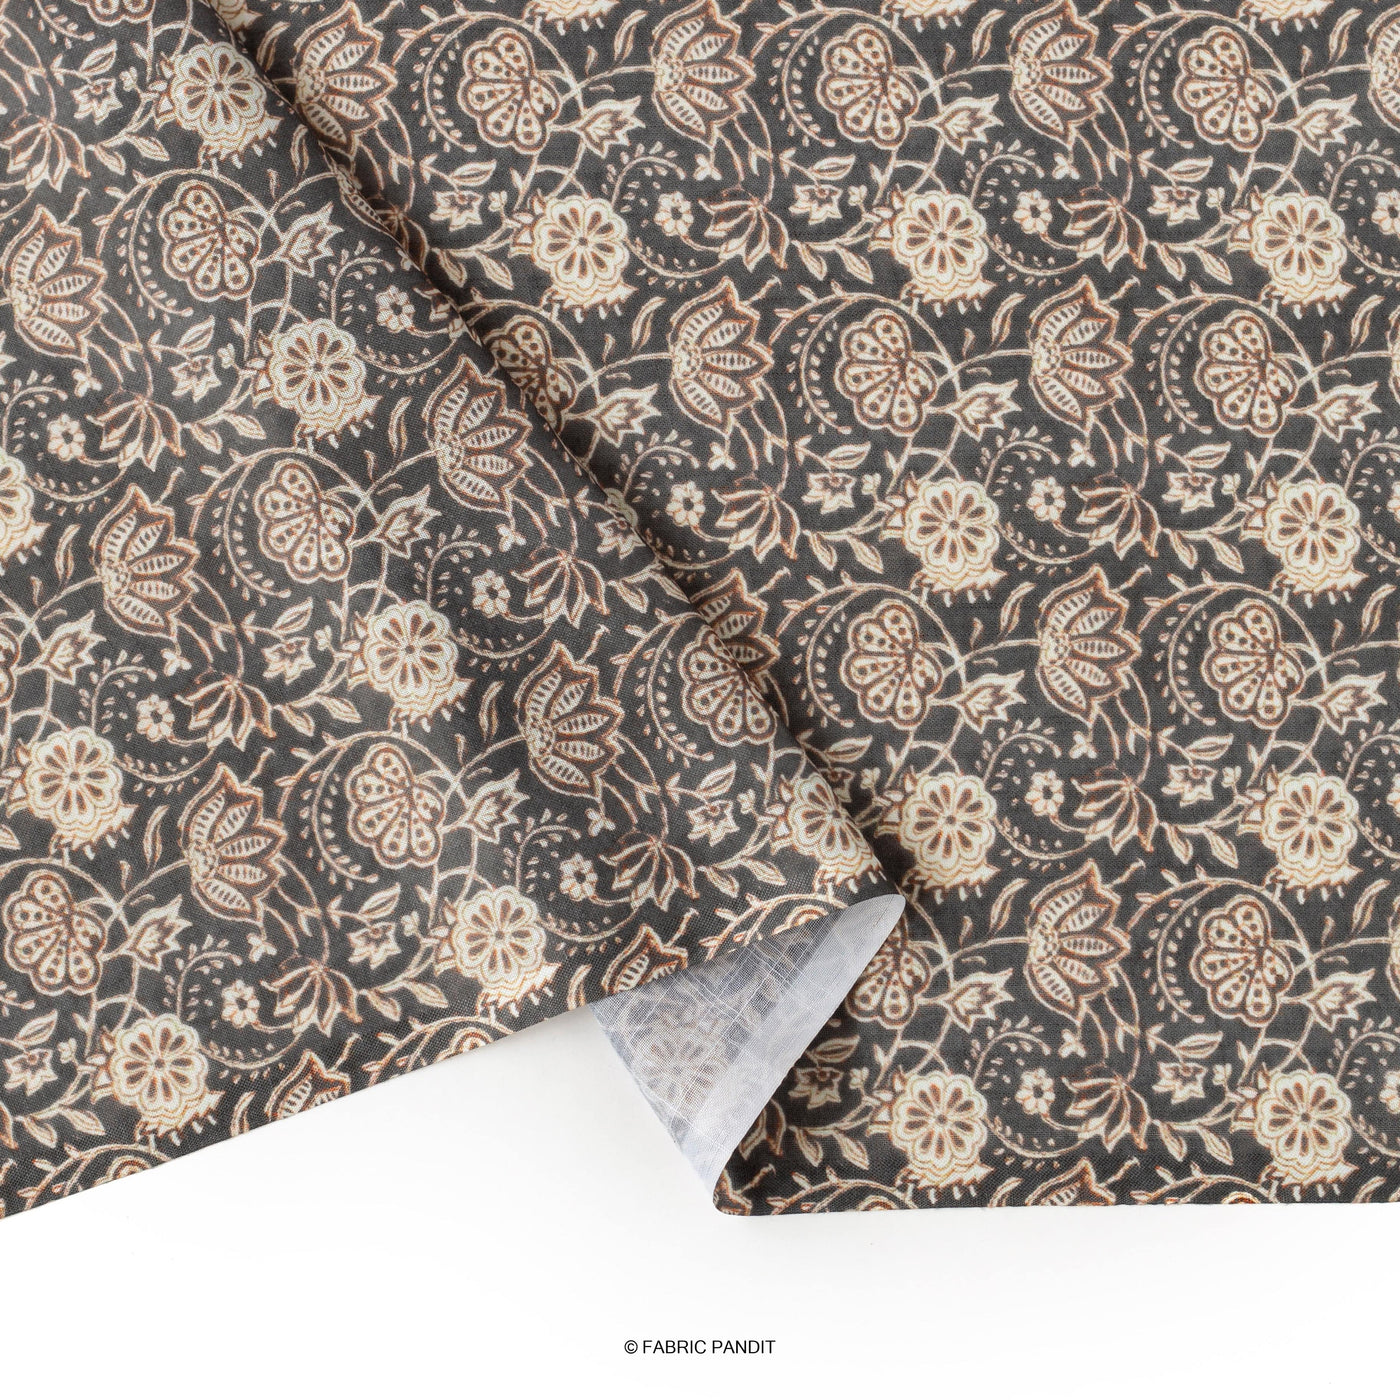 Fabric Pandit Cut Piece (CUT PIECE) Coffee Brown And Beige Continuous Floral Pattern Digital Printed Linen Slub Fabric (Width 44 Inches)